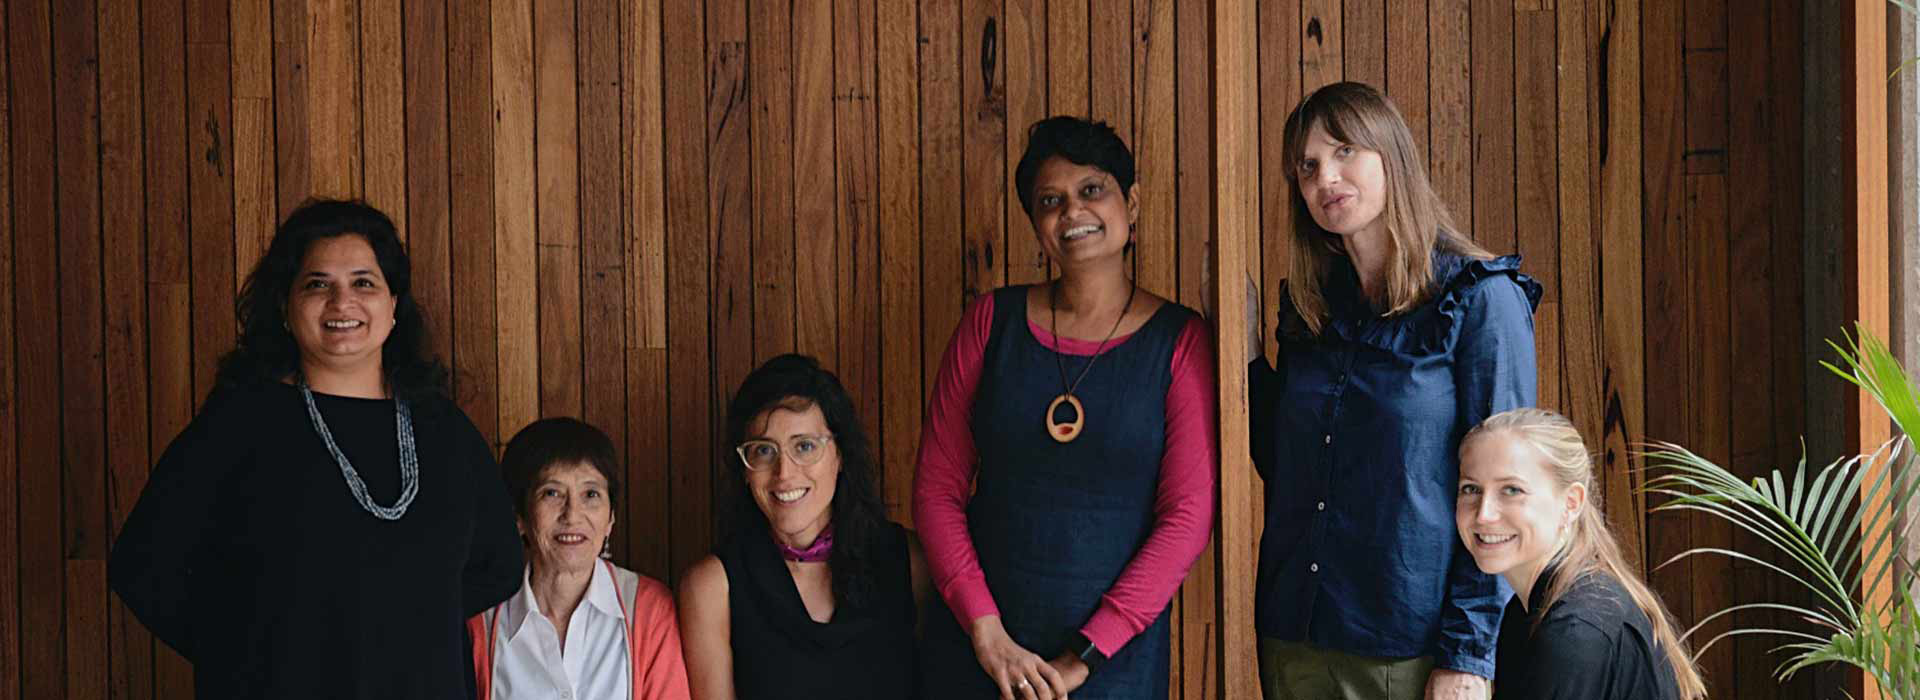 Six women in front of a wooden wall and smiling at the camera